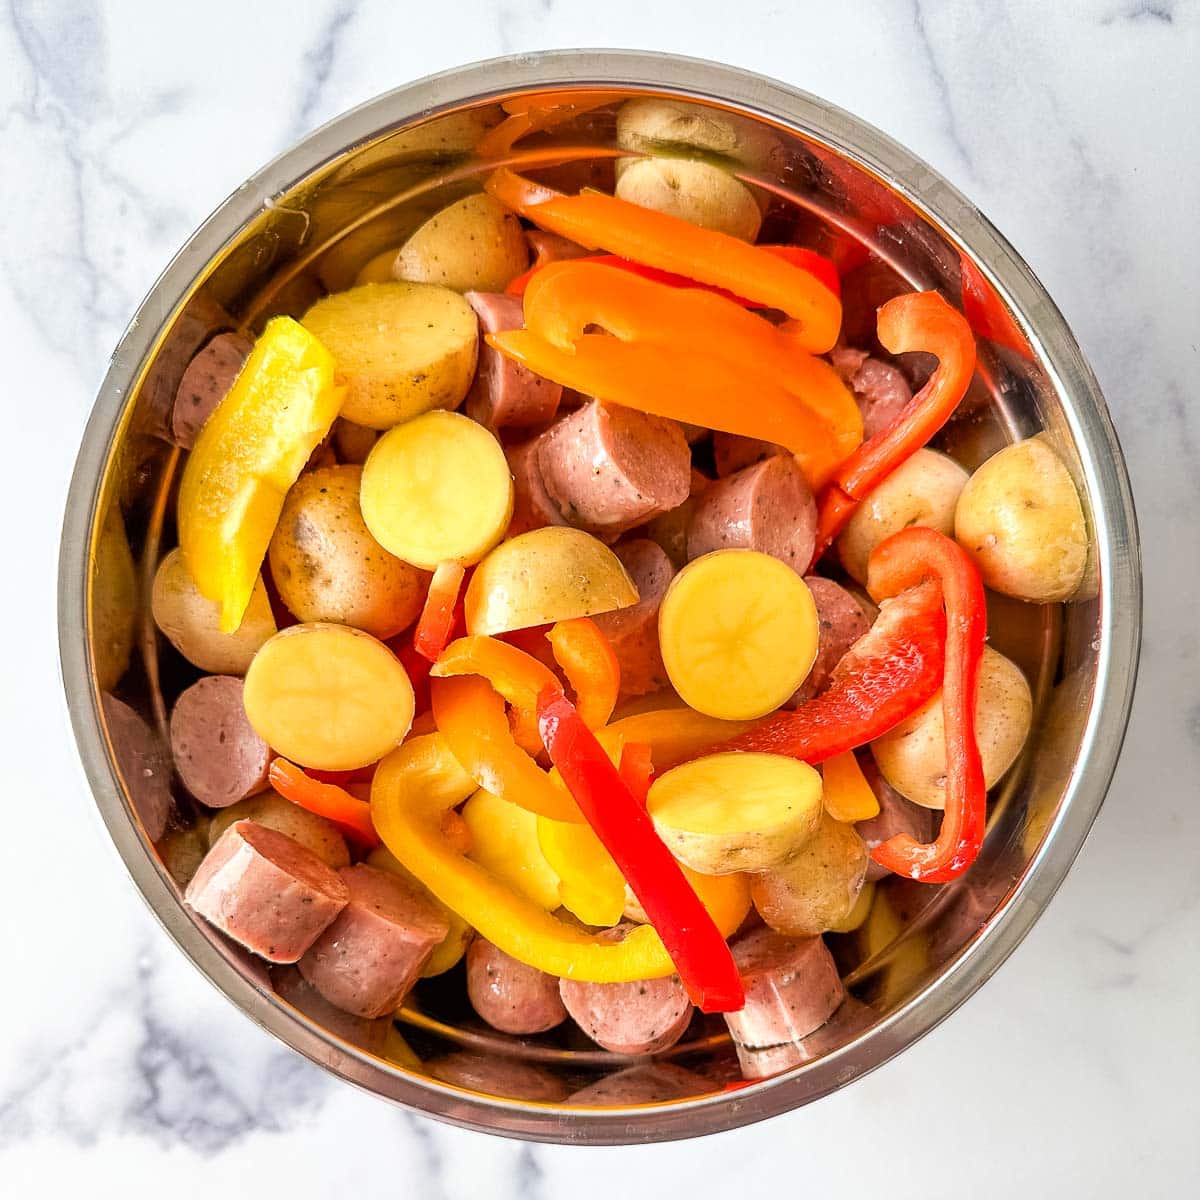 A bowl full of peppers, potatoes, and sausages tossed in olive oil.